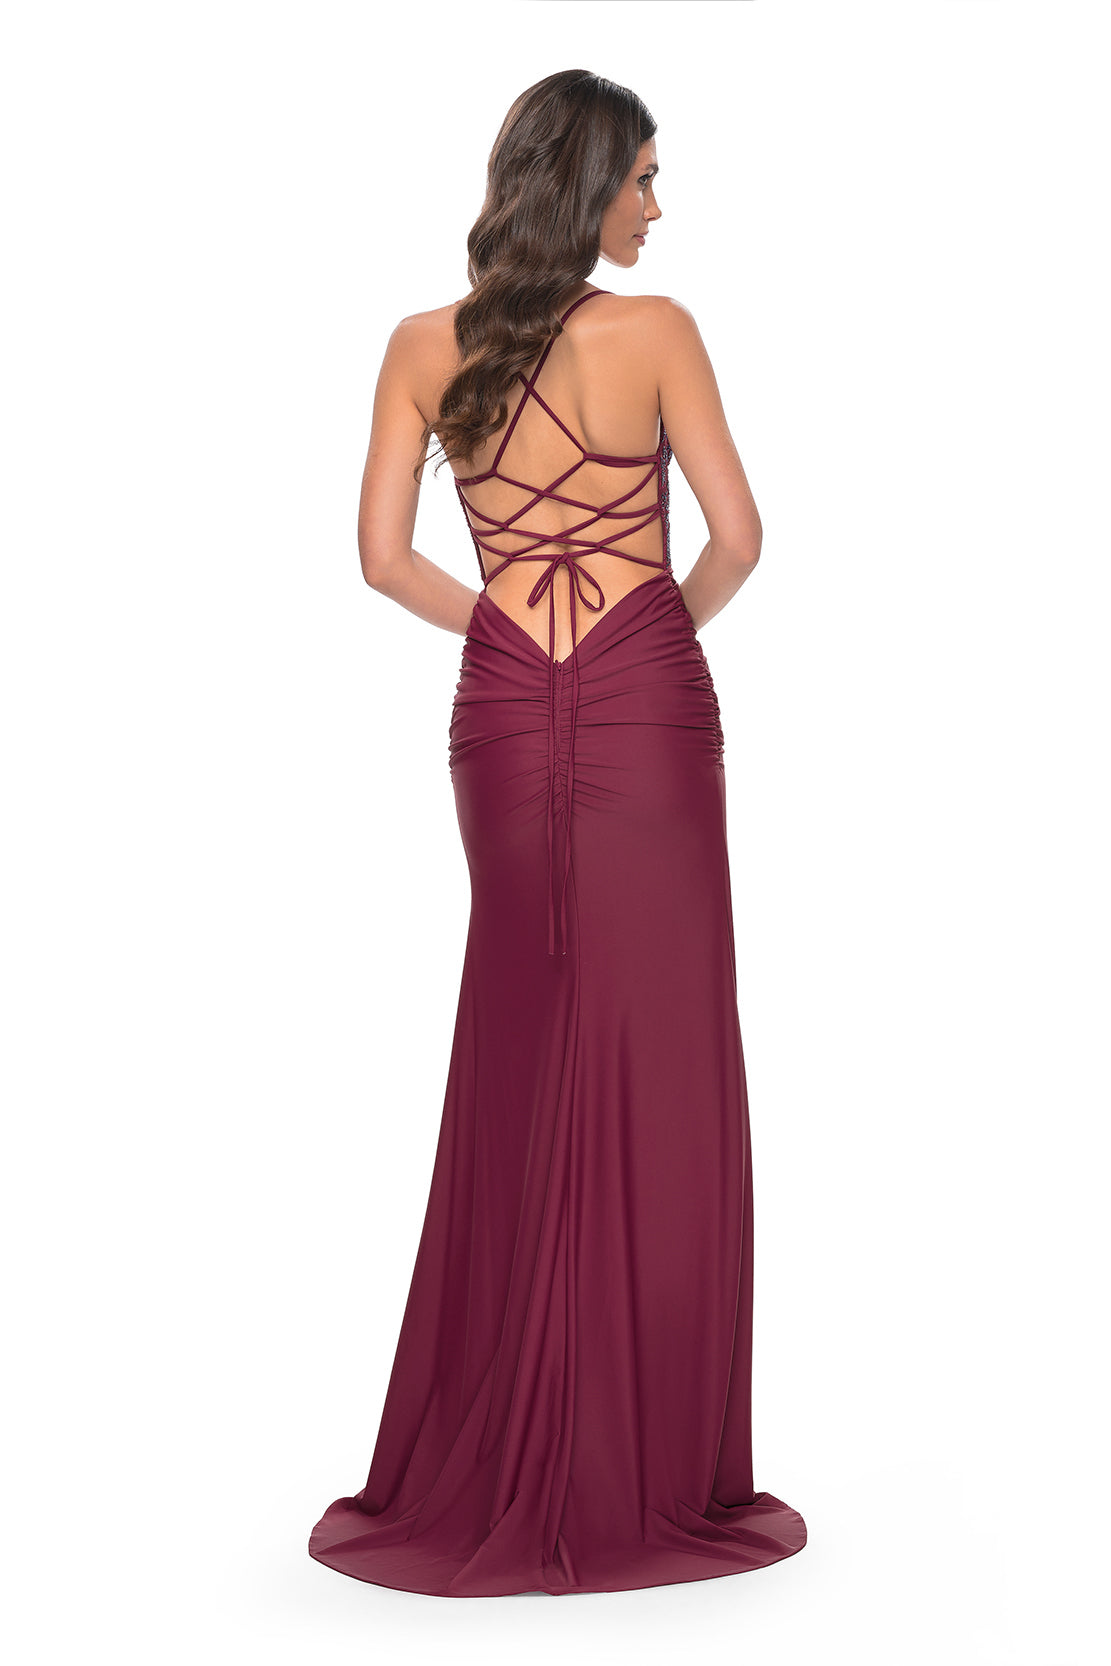 La Femme 31988 Rhinestone Embellished Lace Bodice Prom Gown - A glamorous long dress featuring a ruched jersey skirt, high slit, rhinestone embellished lace bodice with exposed boning, lace-up back, and ruching along the zipper for a perfect fit. The model is wearing the dress in dark Berry. back view,